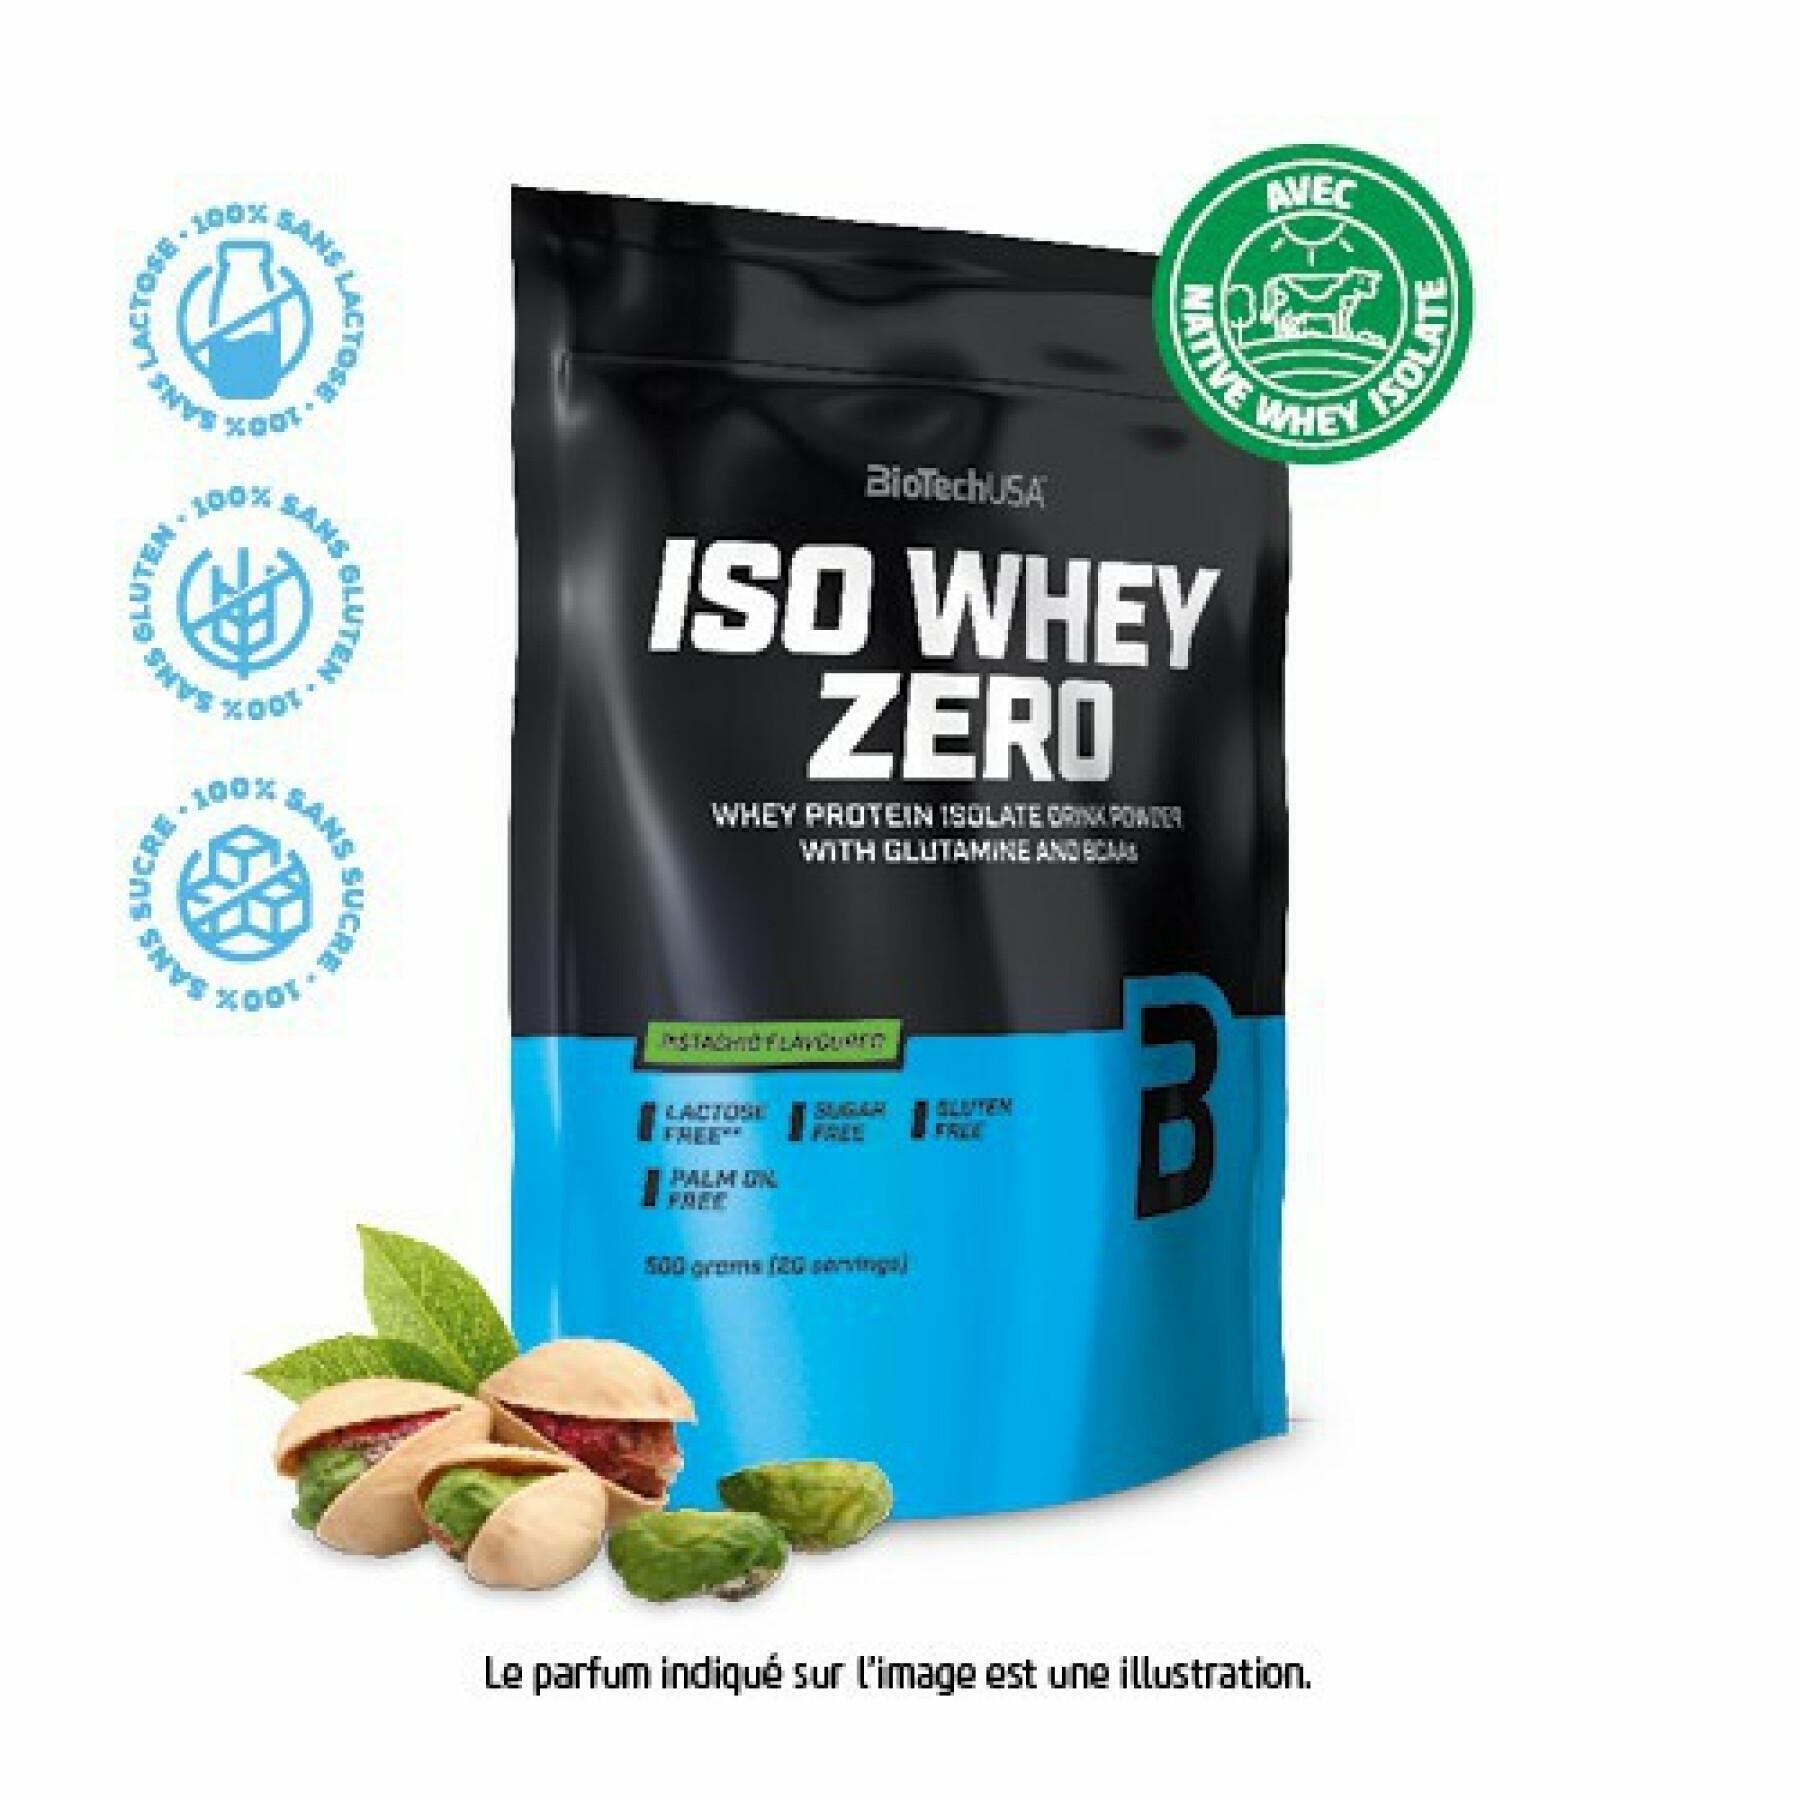 Förpackning med 10 proteinpåsar Biotech USA iso whey zero lactose free - Pistache - 500g